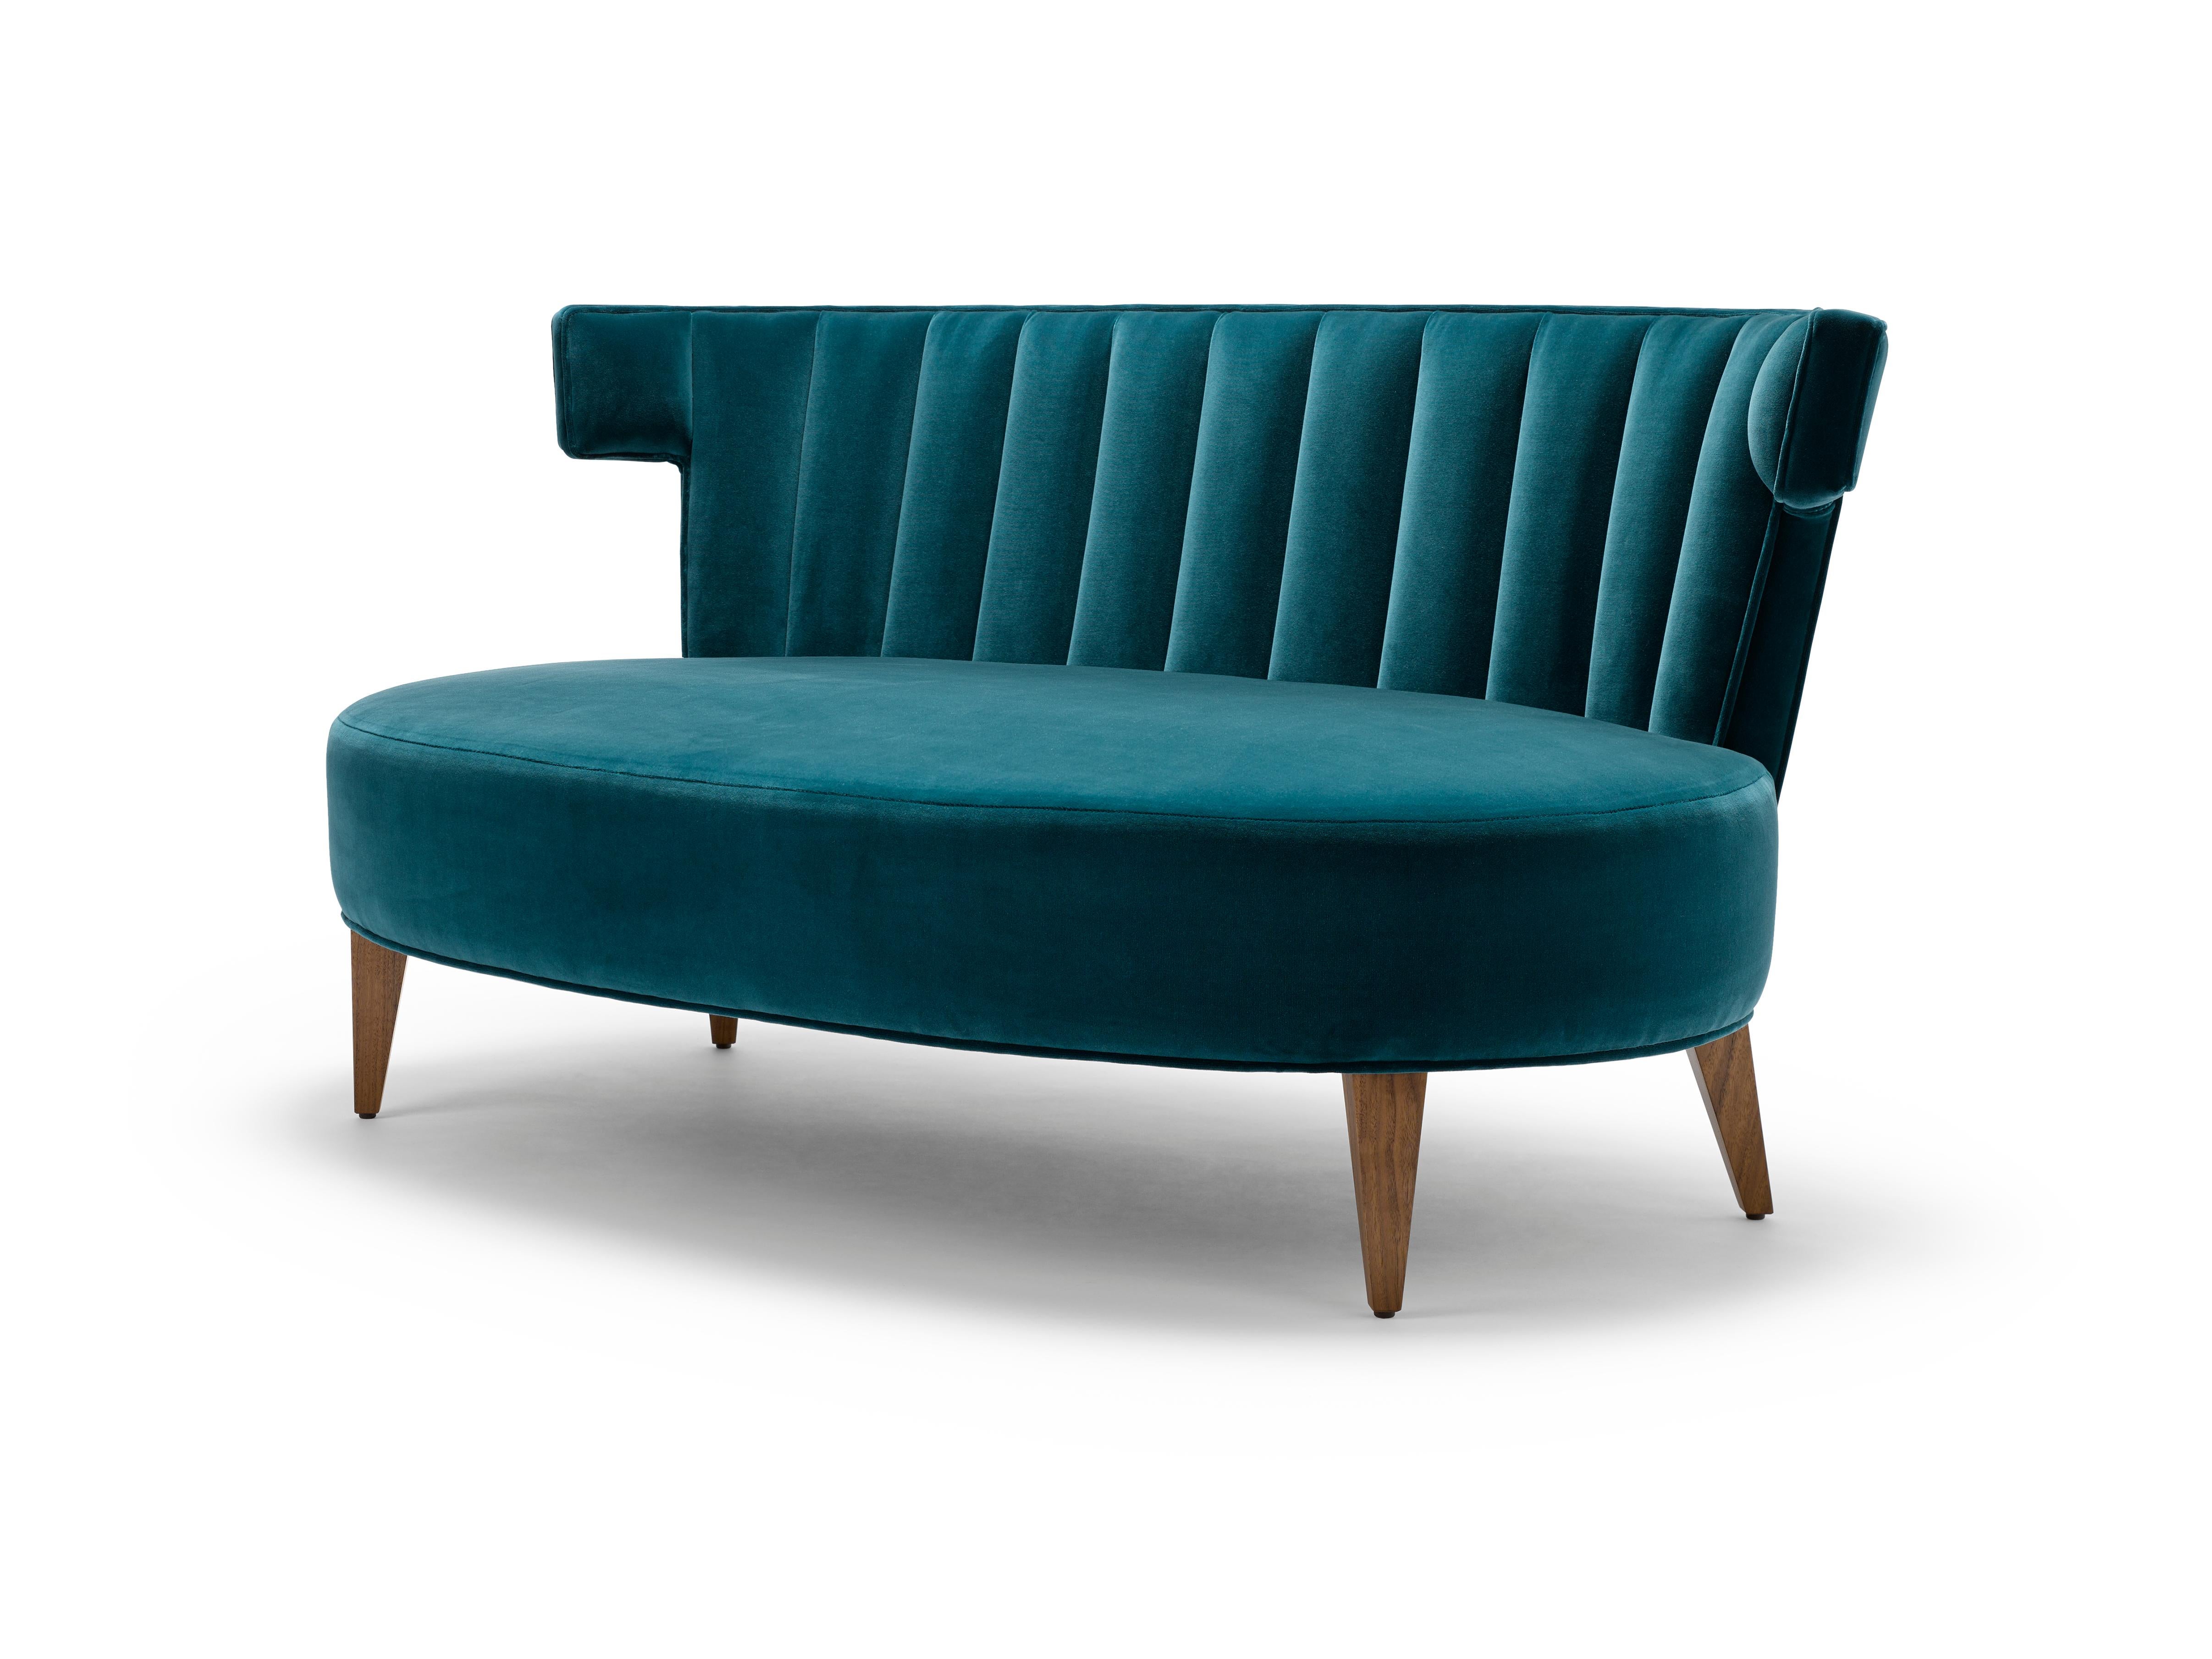 An elegant addition to the Isabella range, this Occasional Sofa is perfect for intimate conversation or soulful contemplation. Shown here upholstered in Designers Guild Cassia Kingfisher, with legs in natural oiled walnut.

Construction: solid